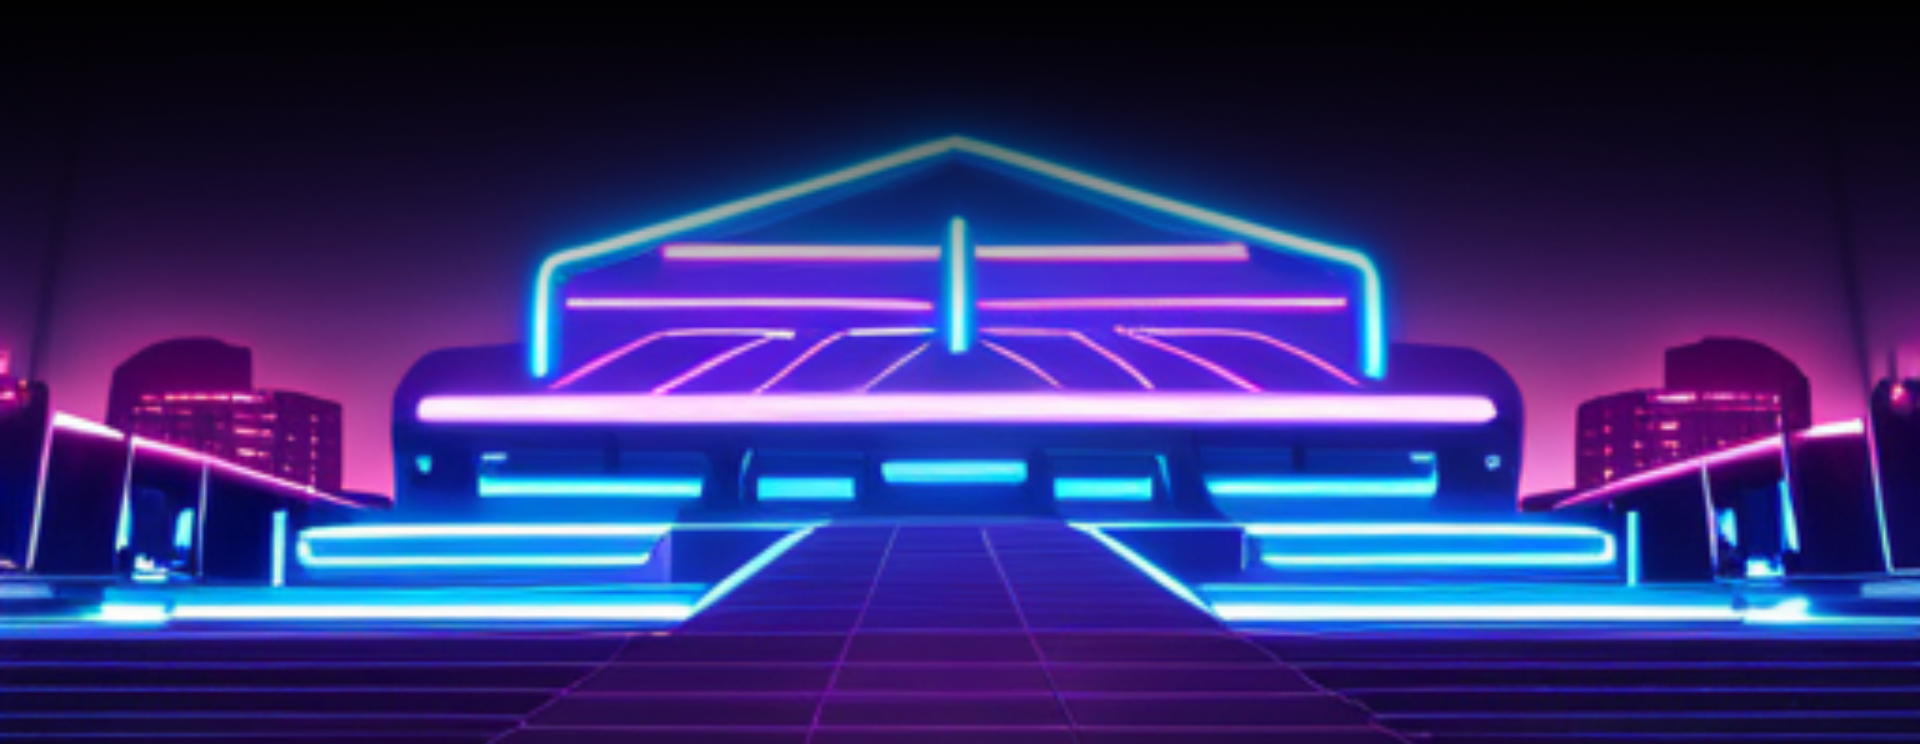 Neon Pulse graphical footer